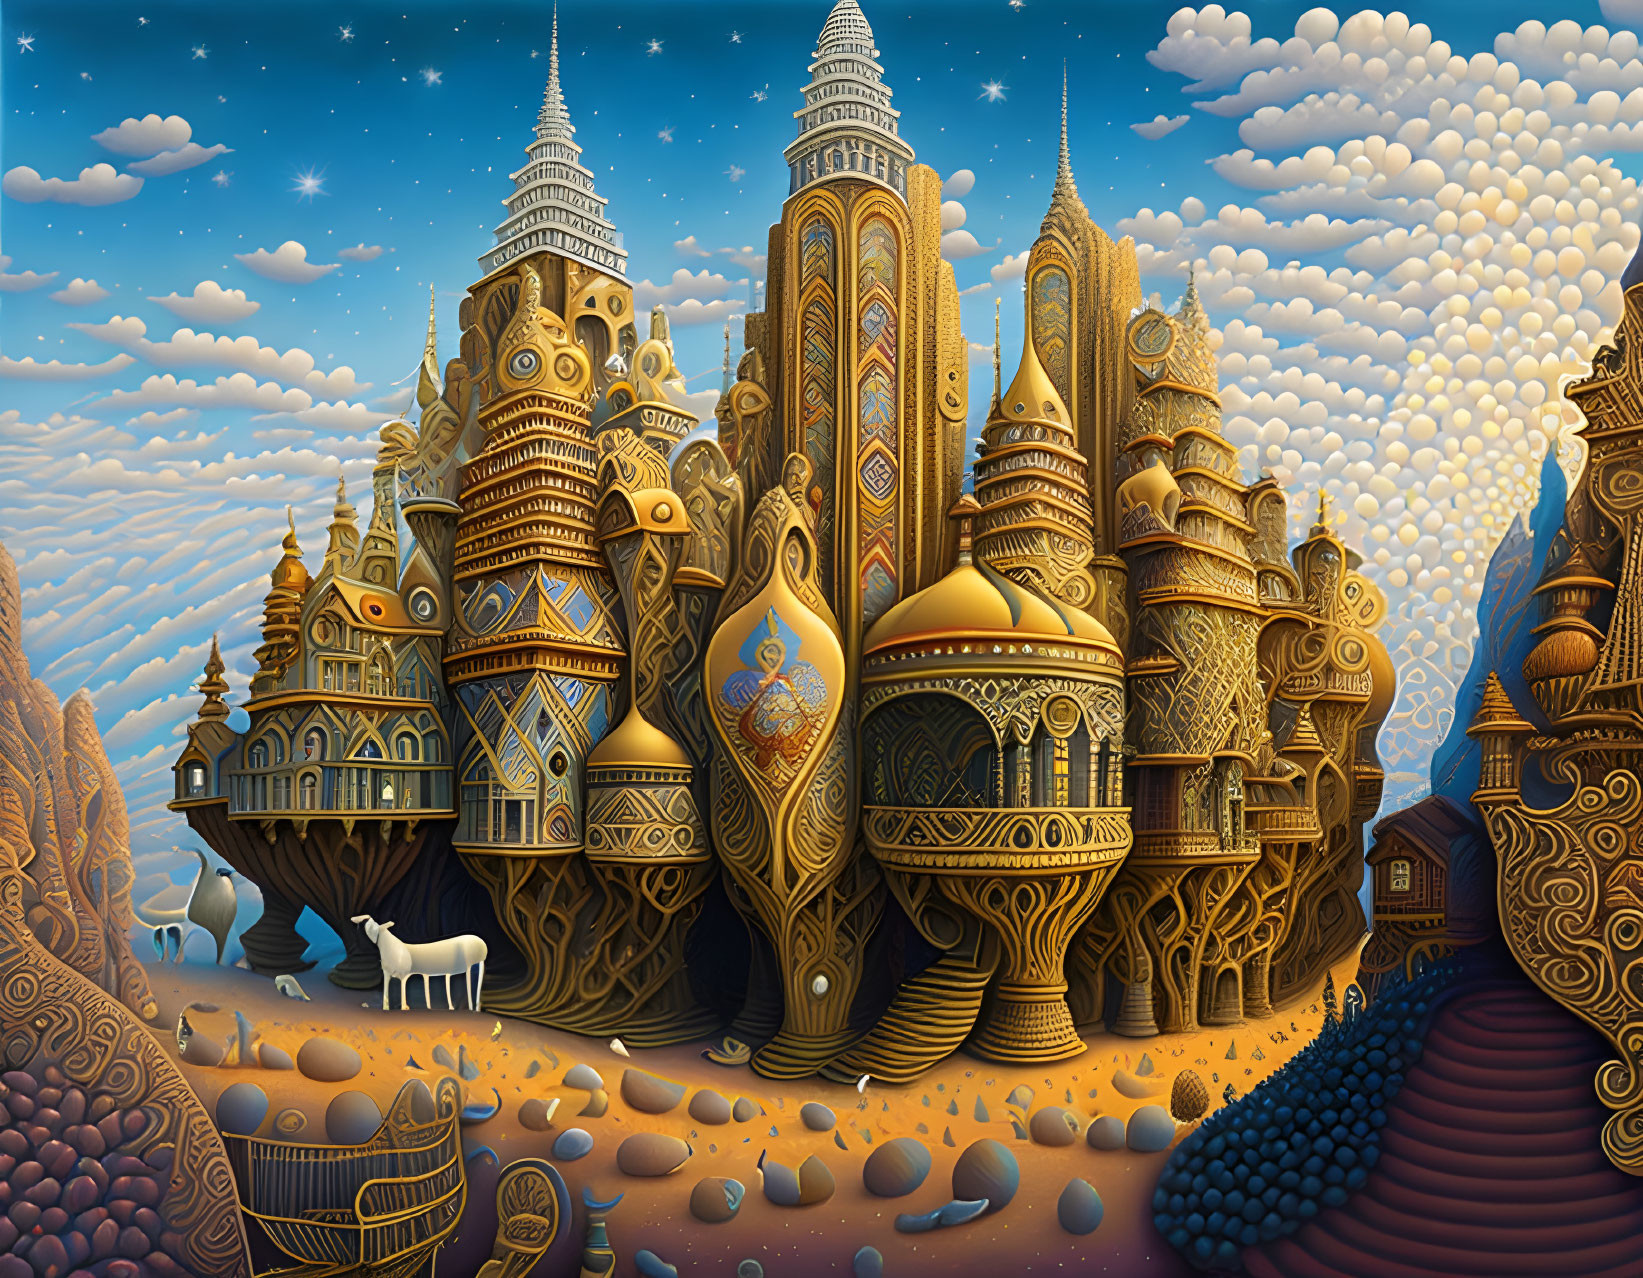 Fantastical landscape with golden towers and white horse